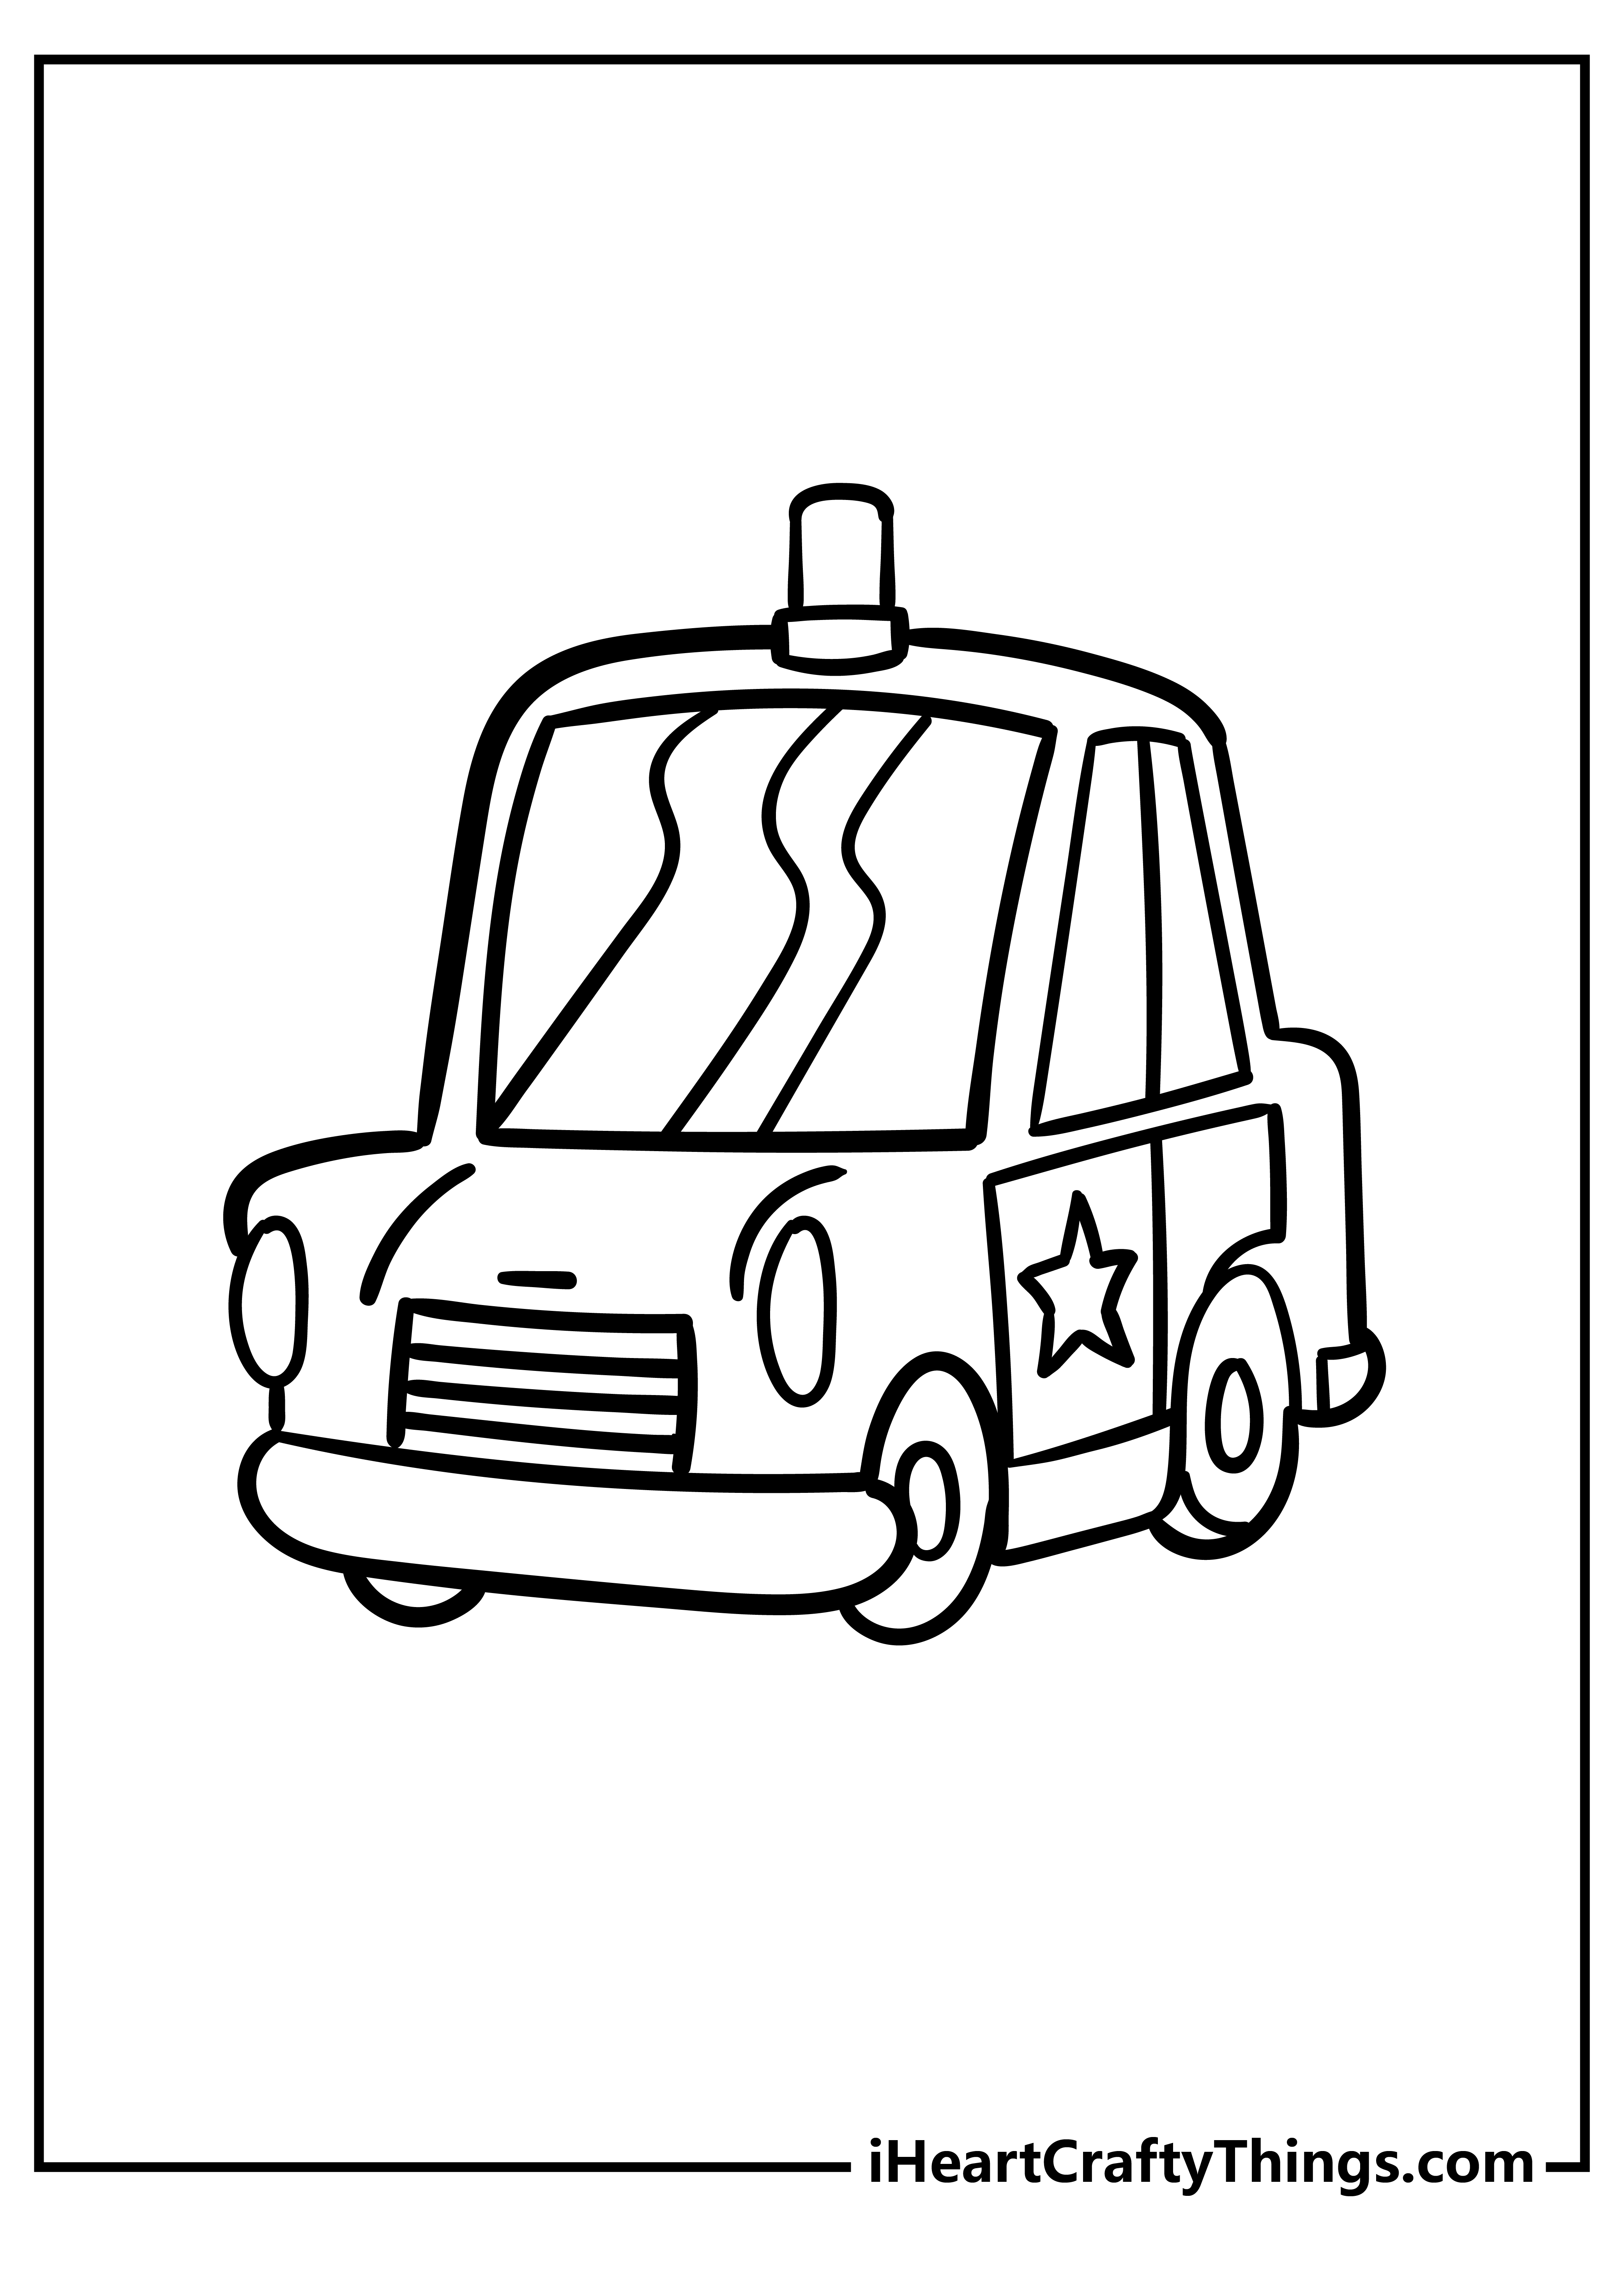 Police Car Coloring Sheet for children free download